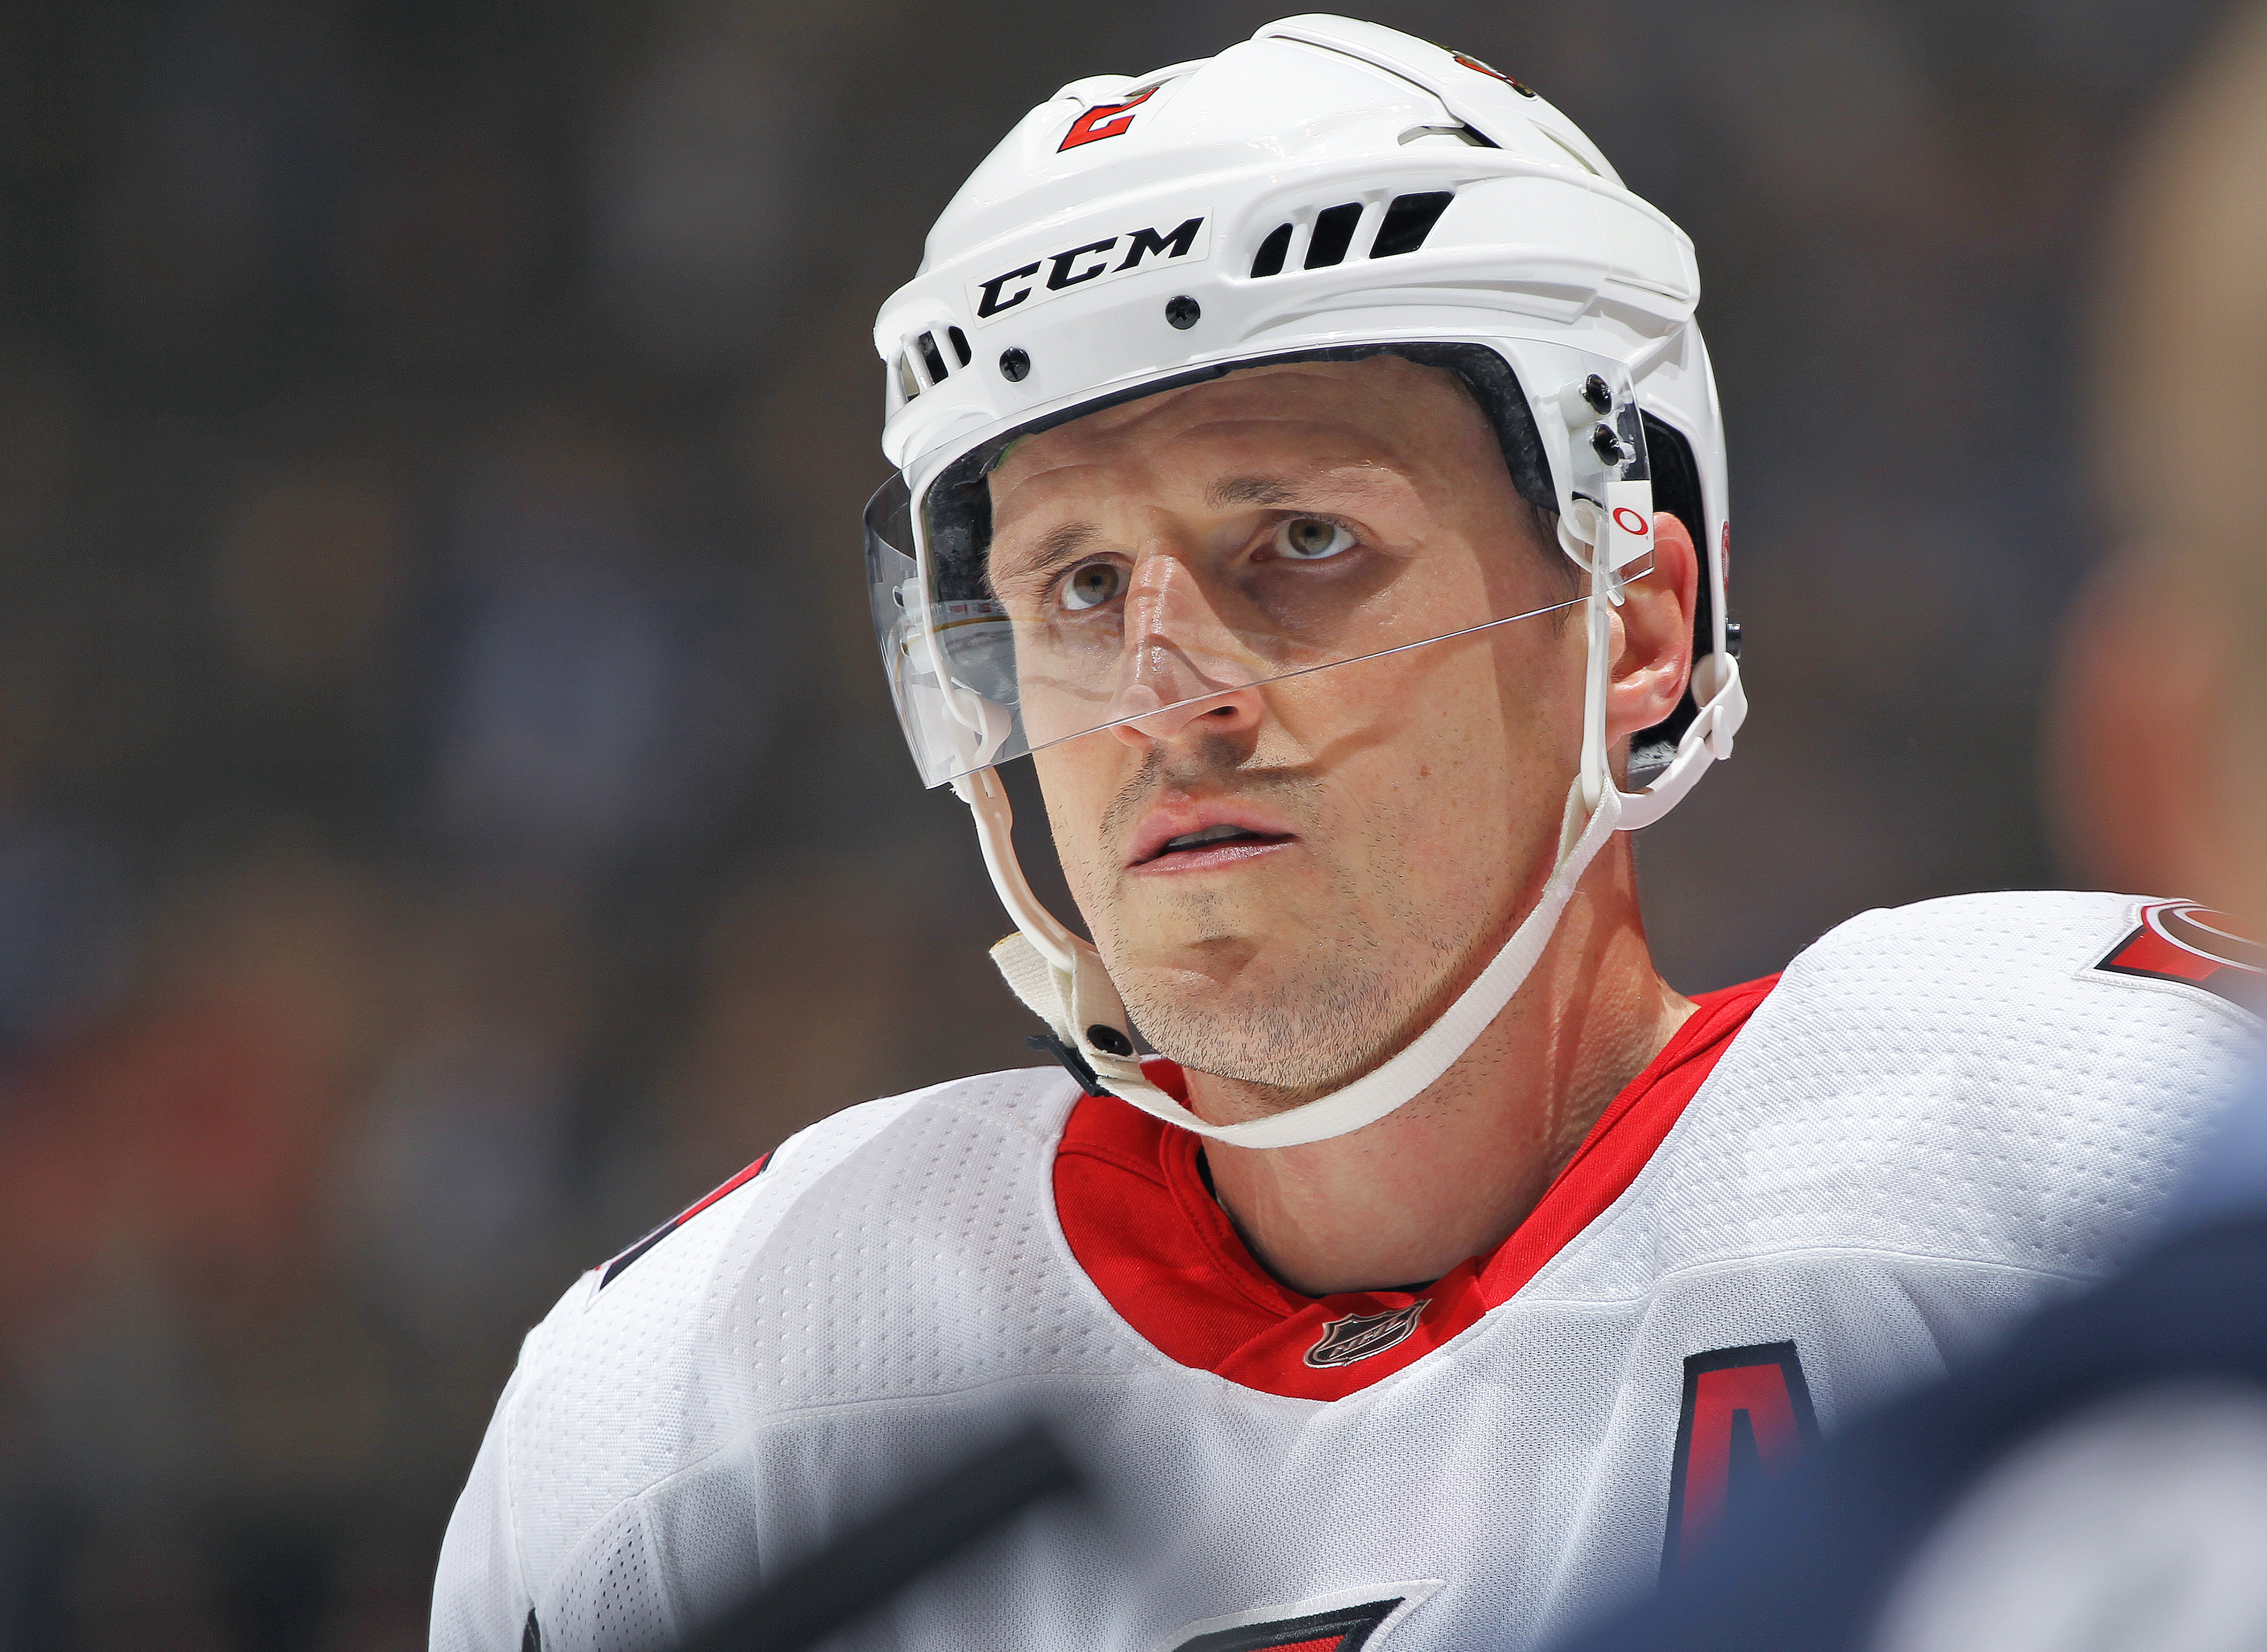 Kings acquire Dion Phaneuf in trade with Senators - Sports Illustrated